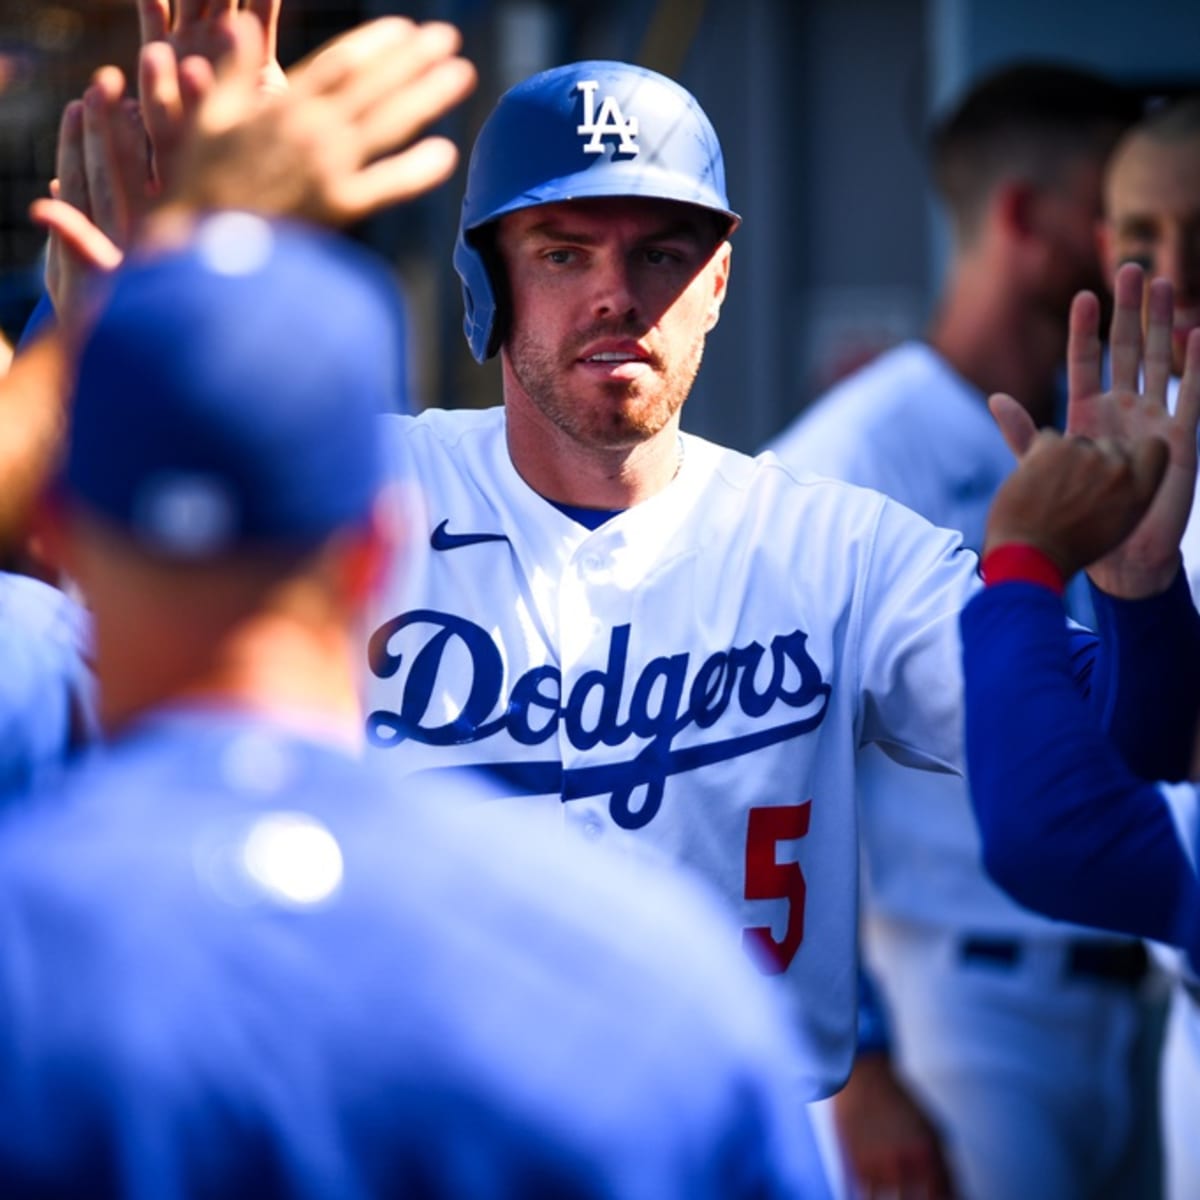 Dodgers roster: Diego Cartaya, Busch, Andy Pages, DeLuca now on 40